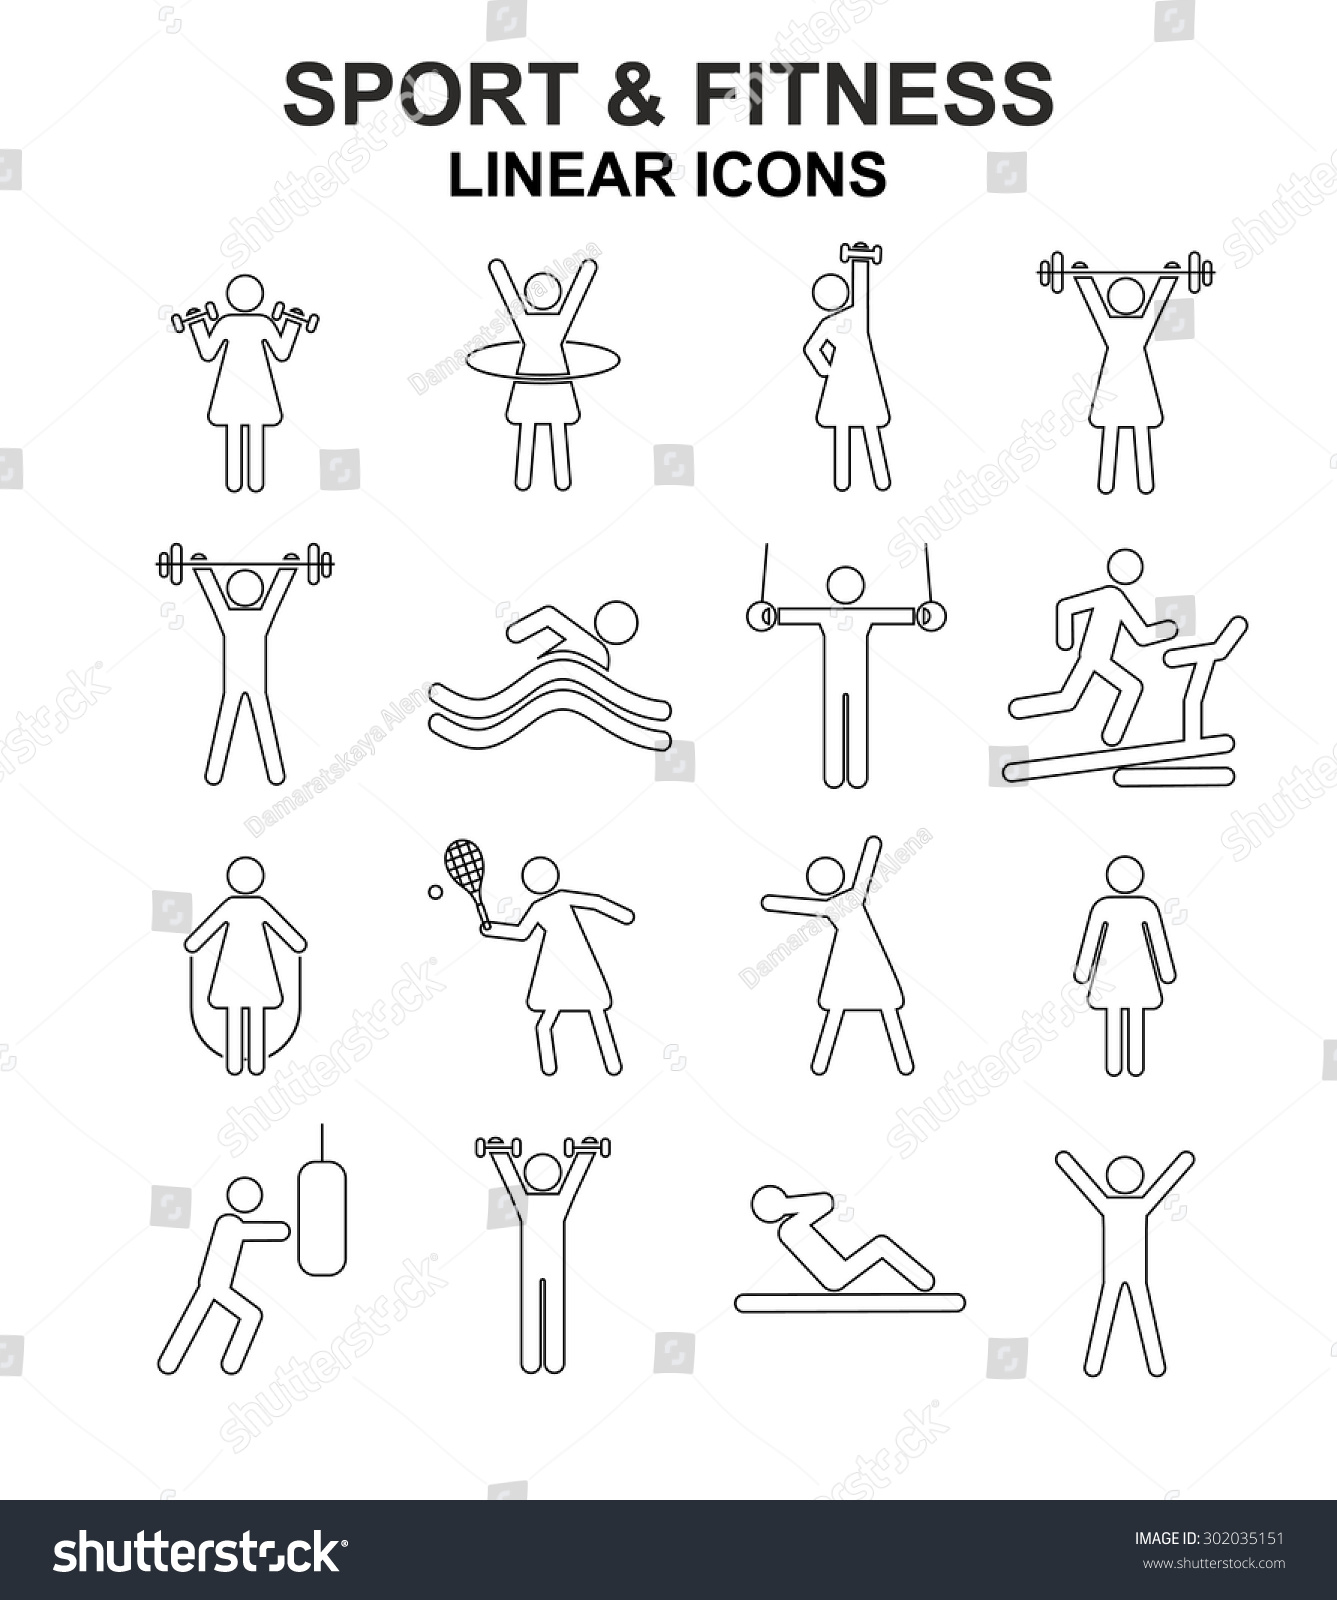 Fitness And Sport Vector Linear Icons Set. Line Style Fitness Icons